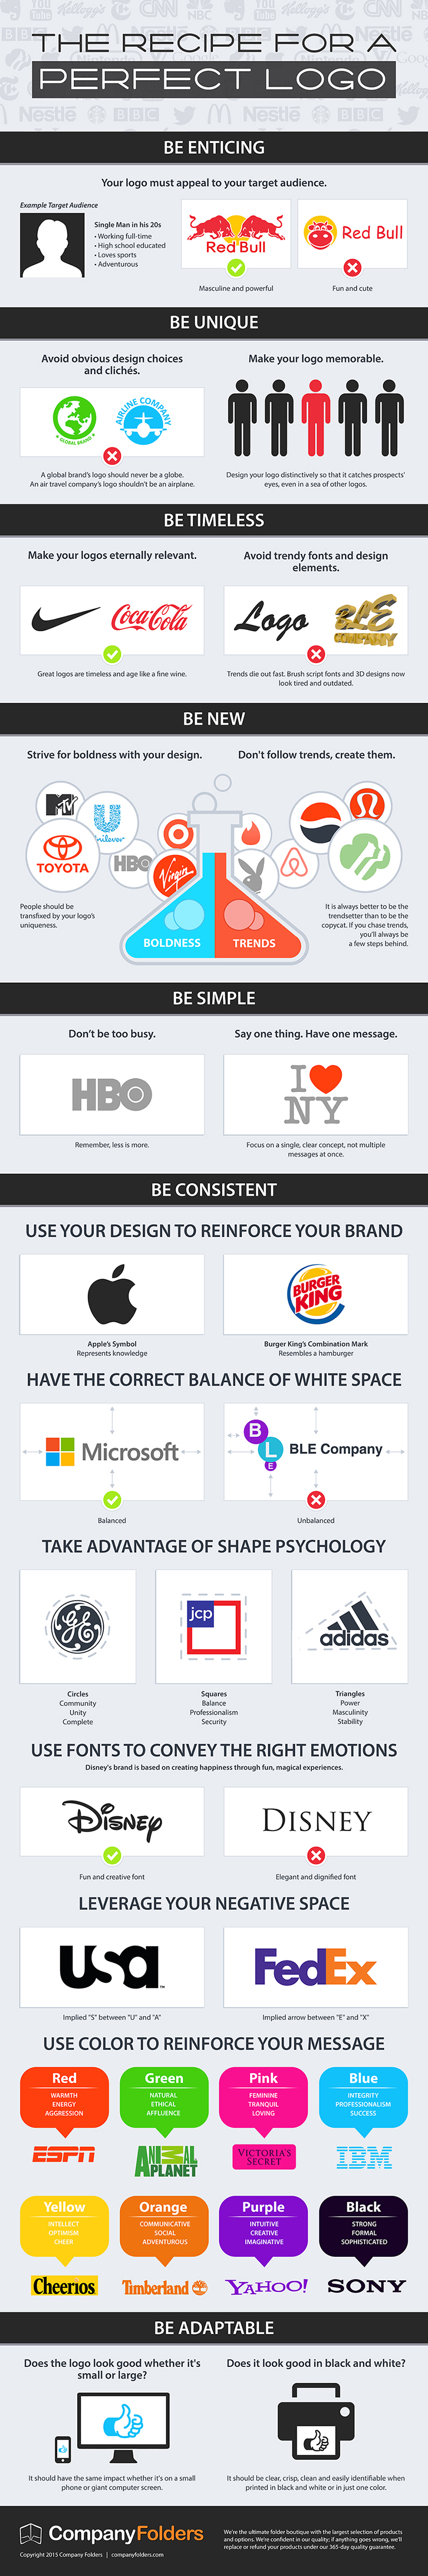 7 Things Your Client's Logo Needs to Succeed 1